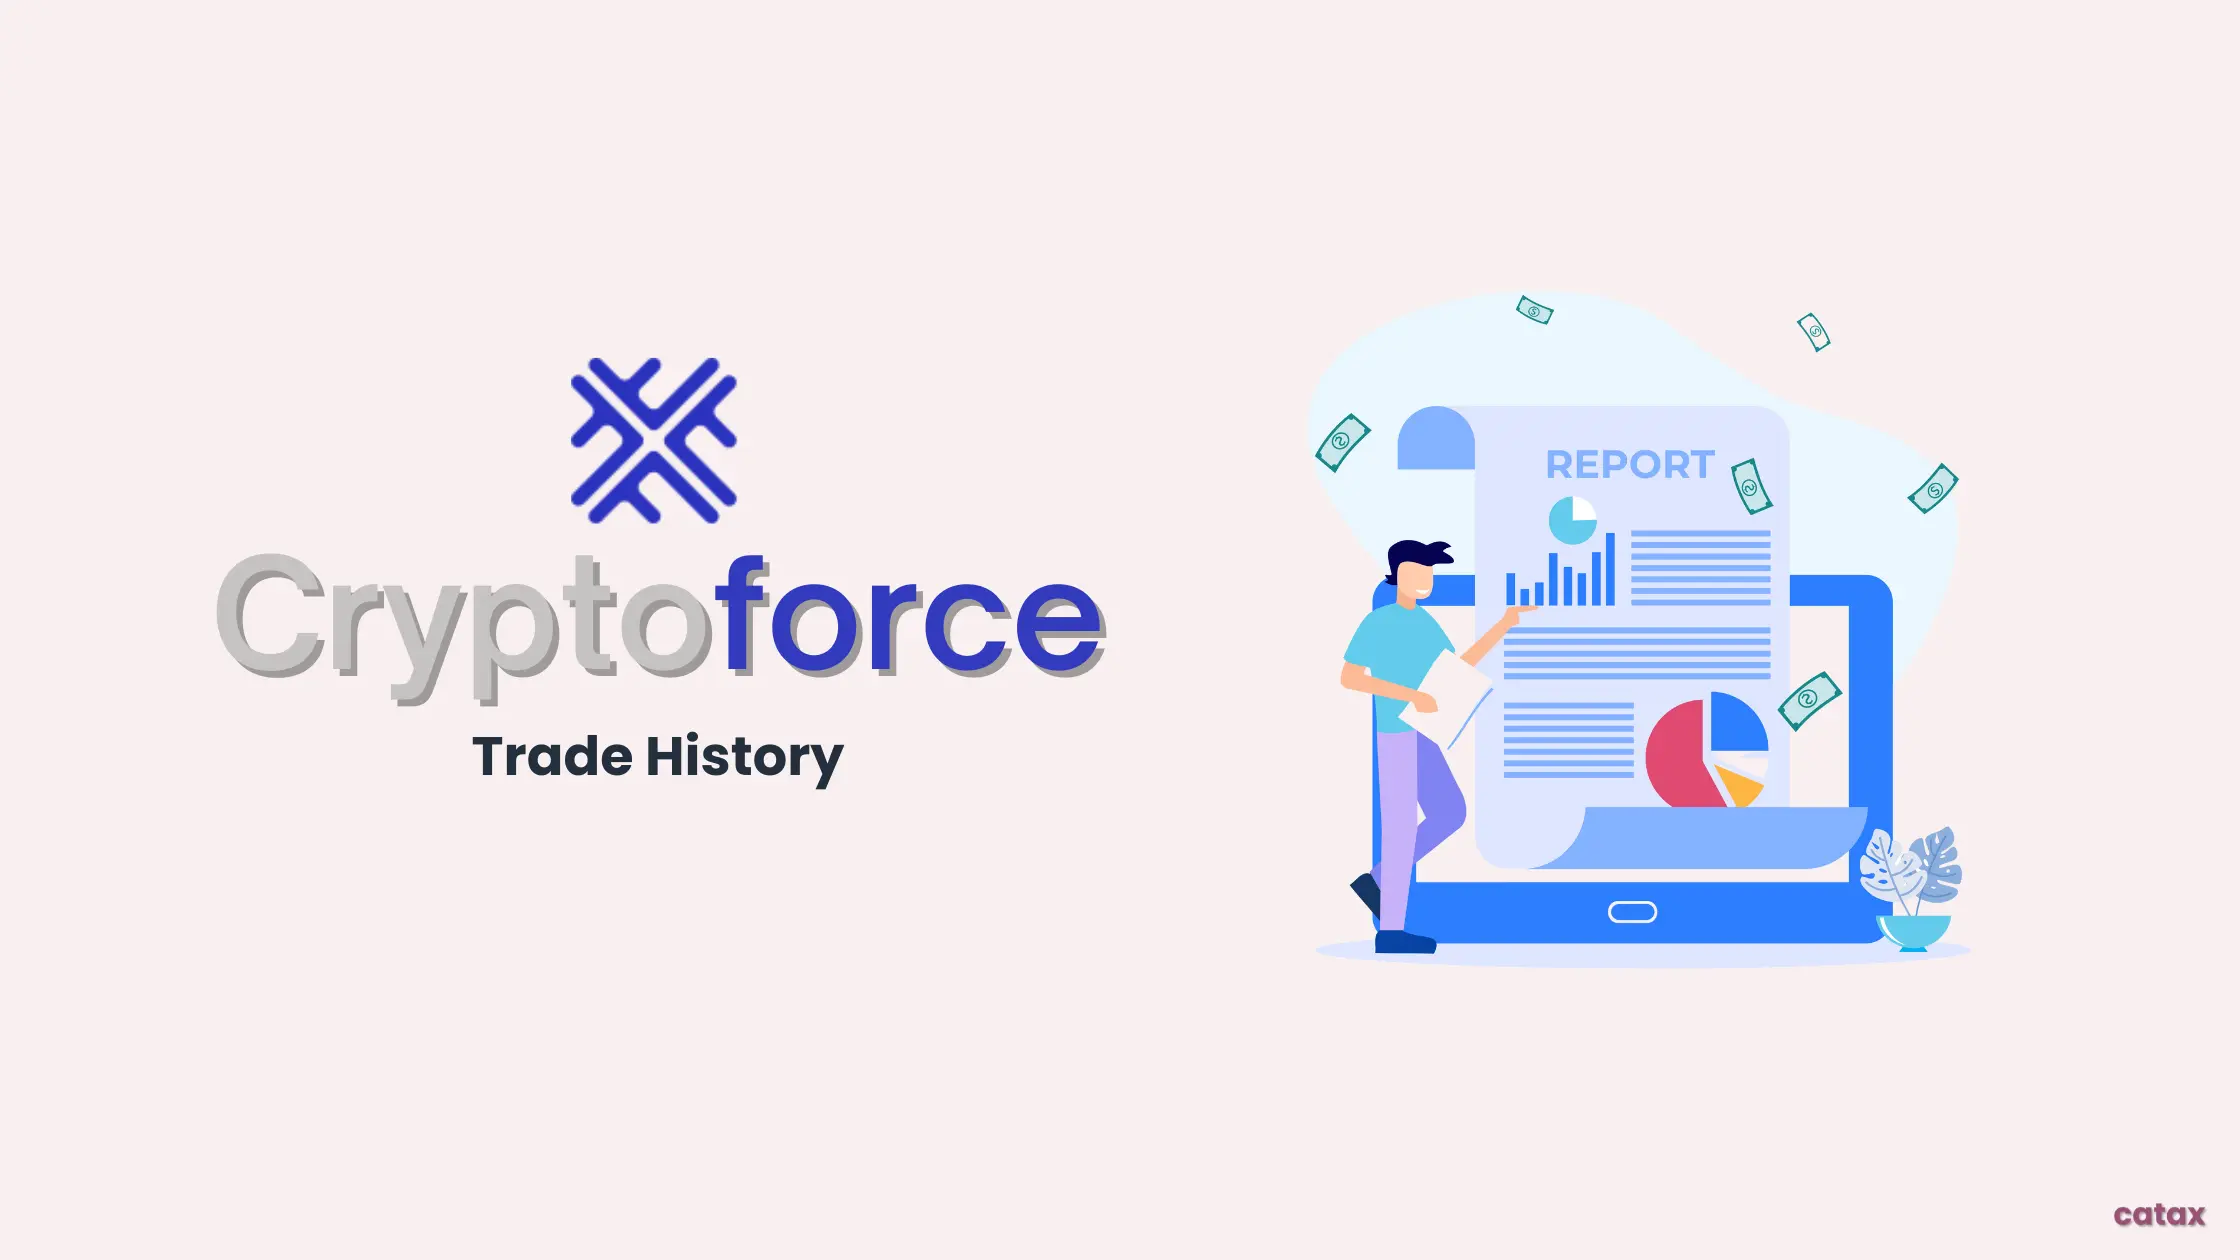 How to Export Cryptoforce Trade History?